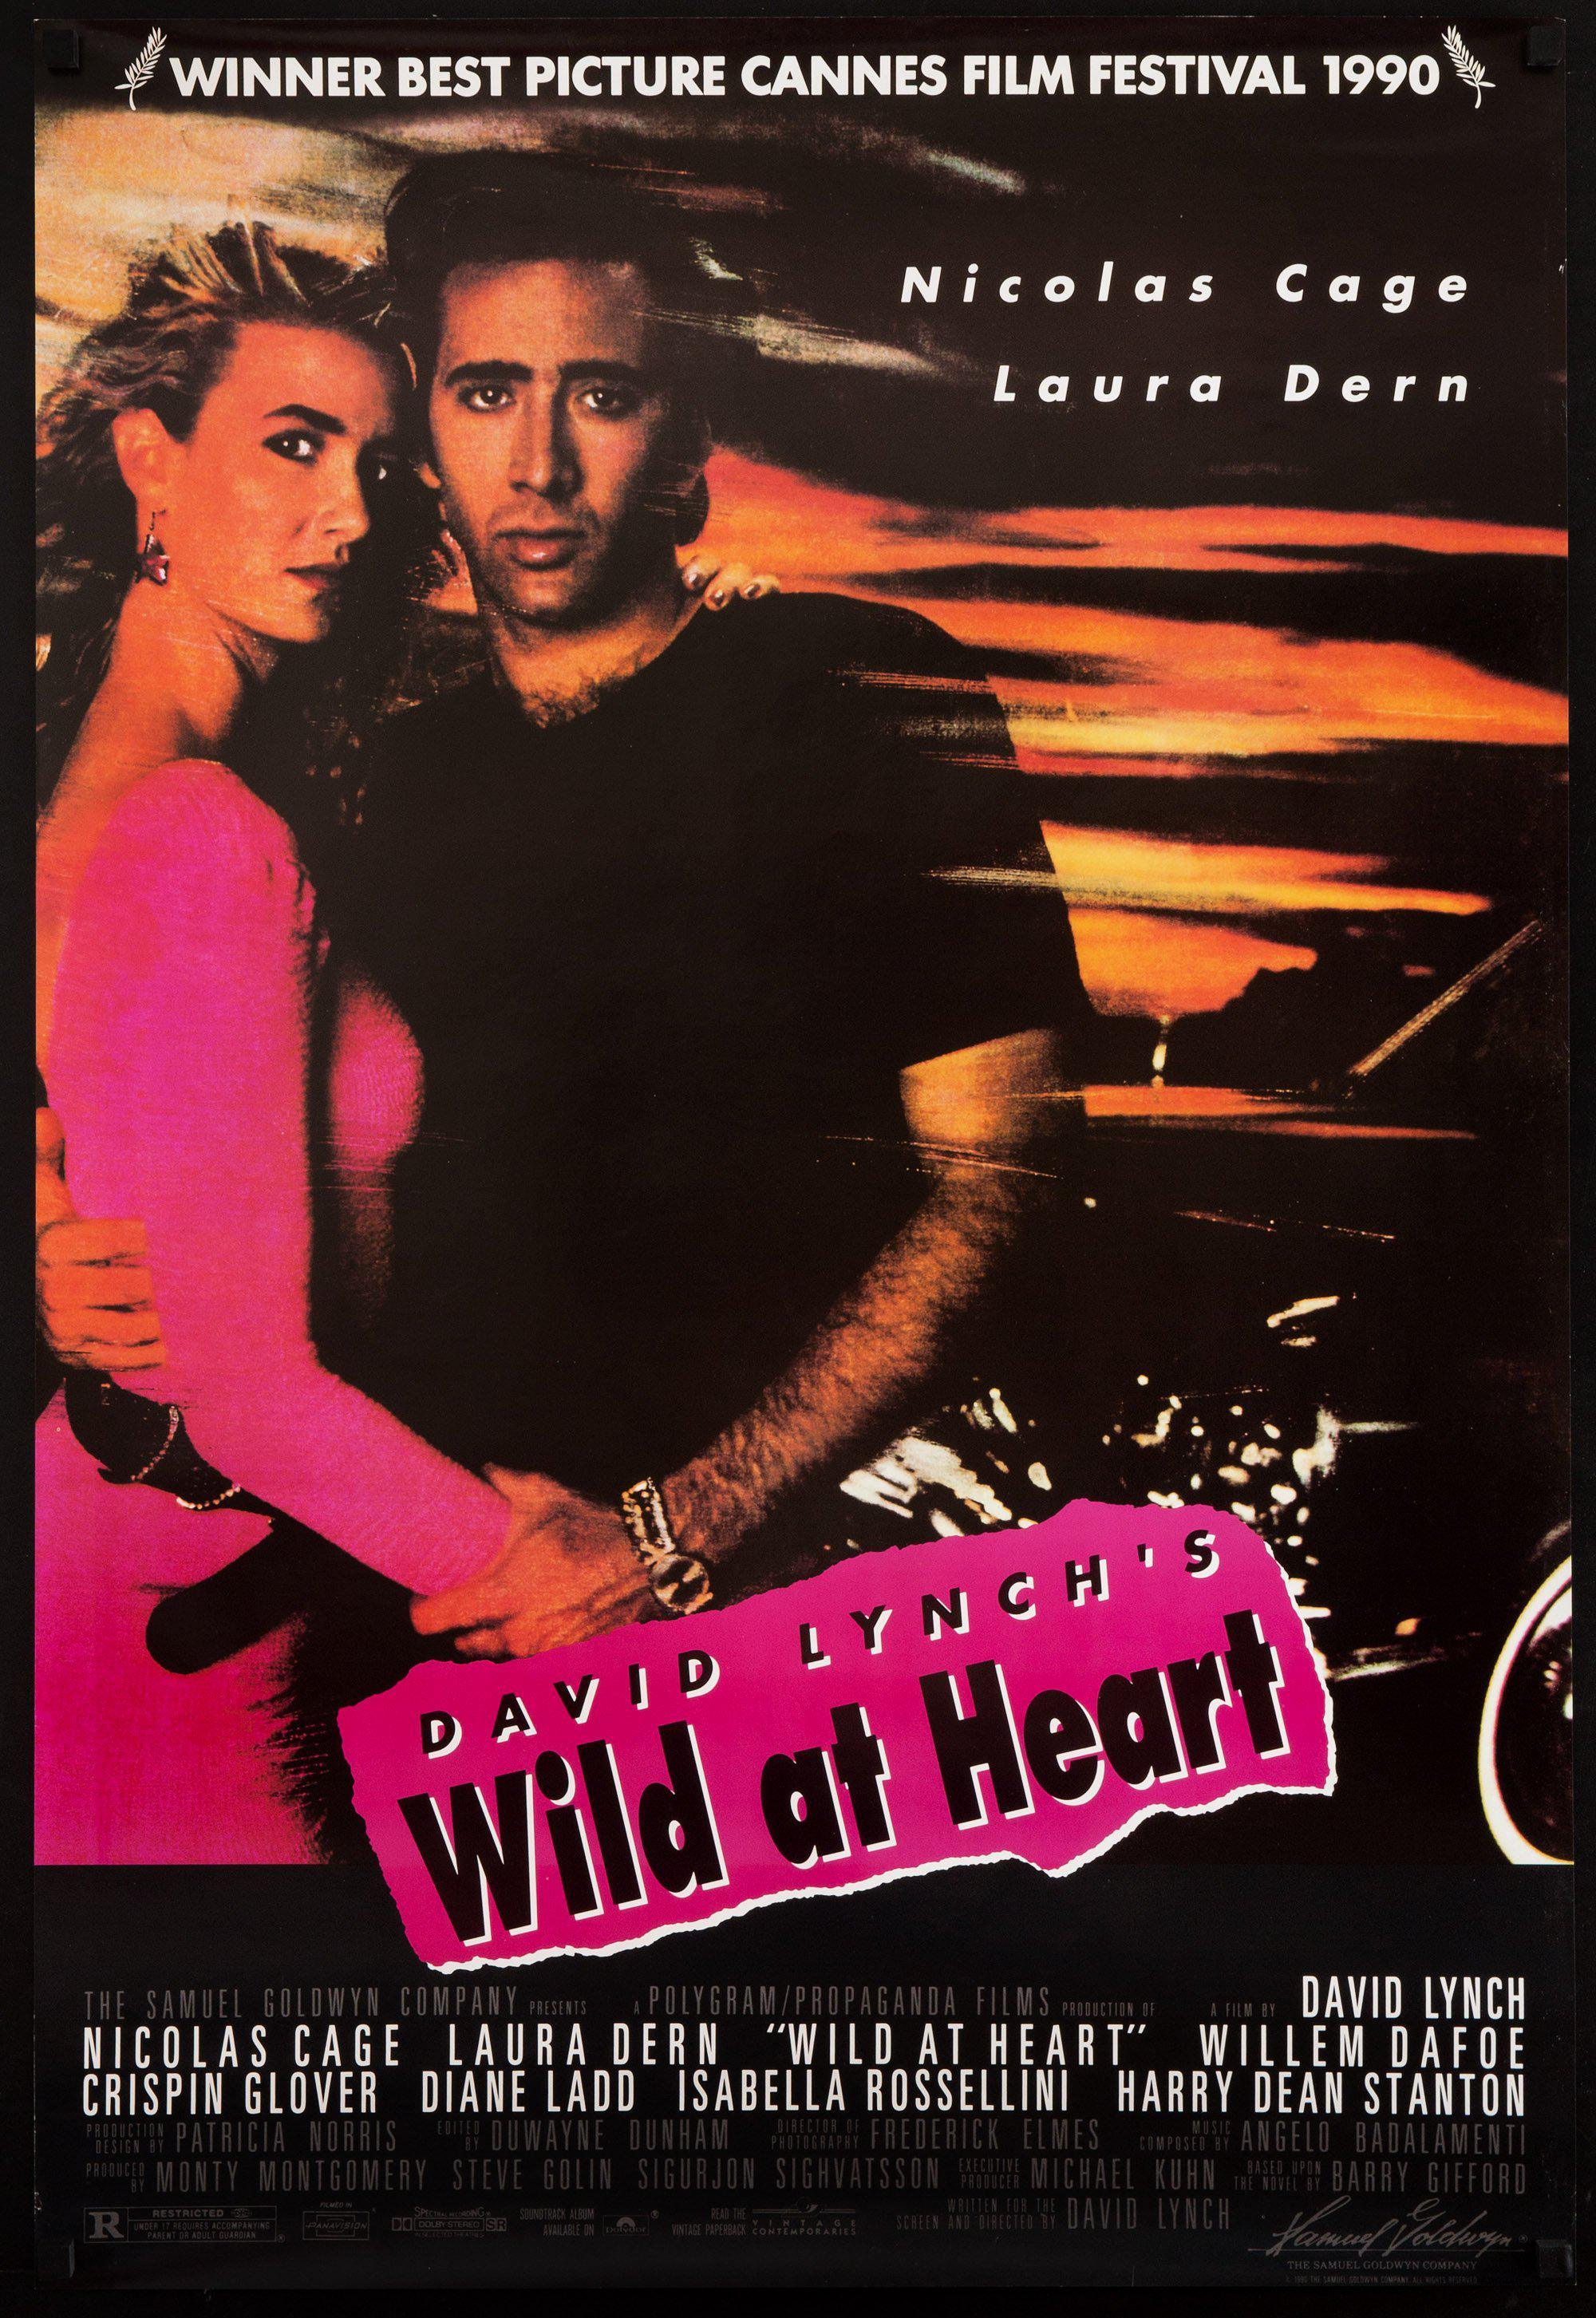 5 Reasons Why “Wild At Heart” Is The Most Subversive David Lynch Movie Ever